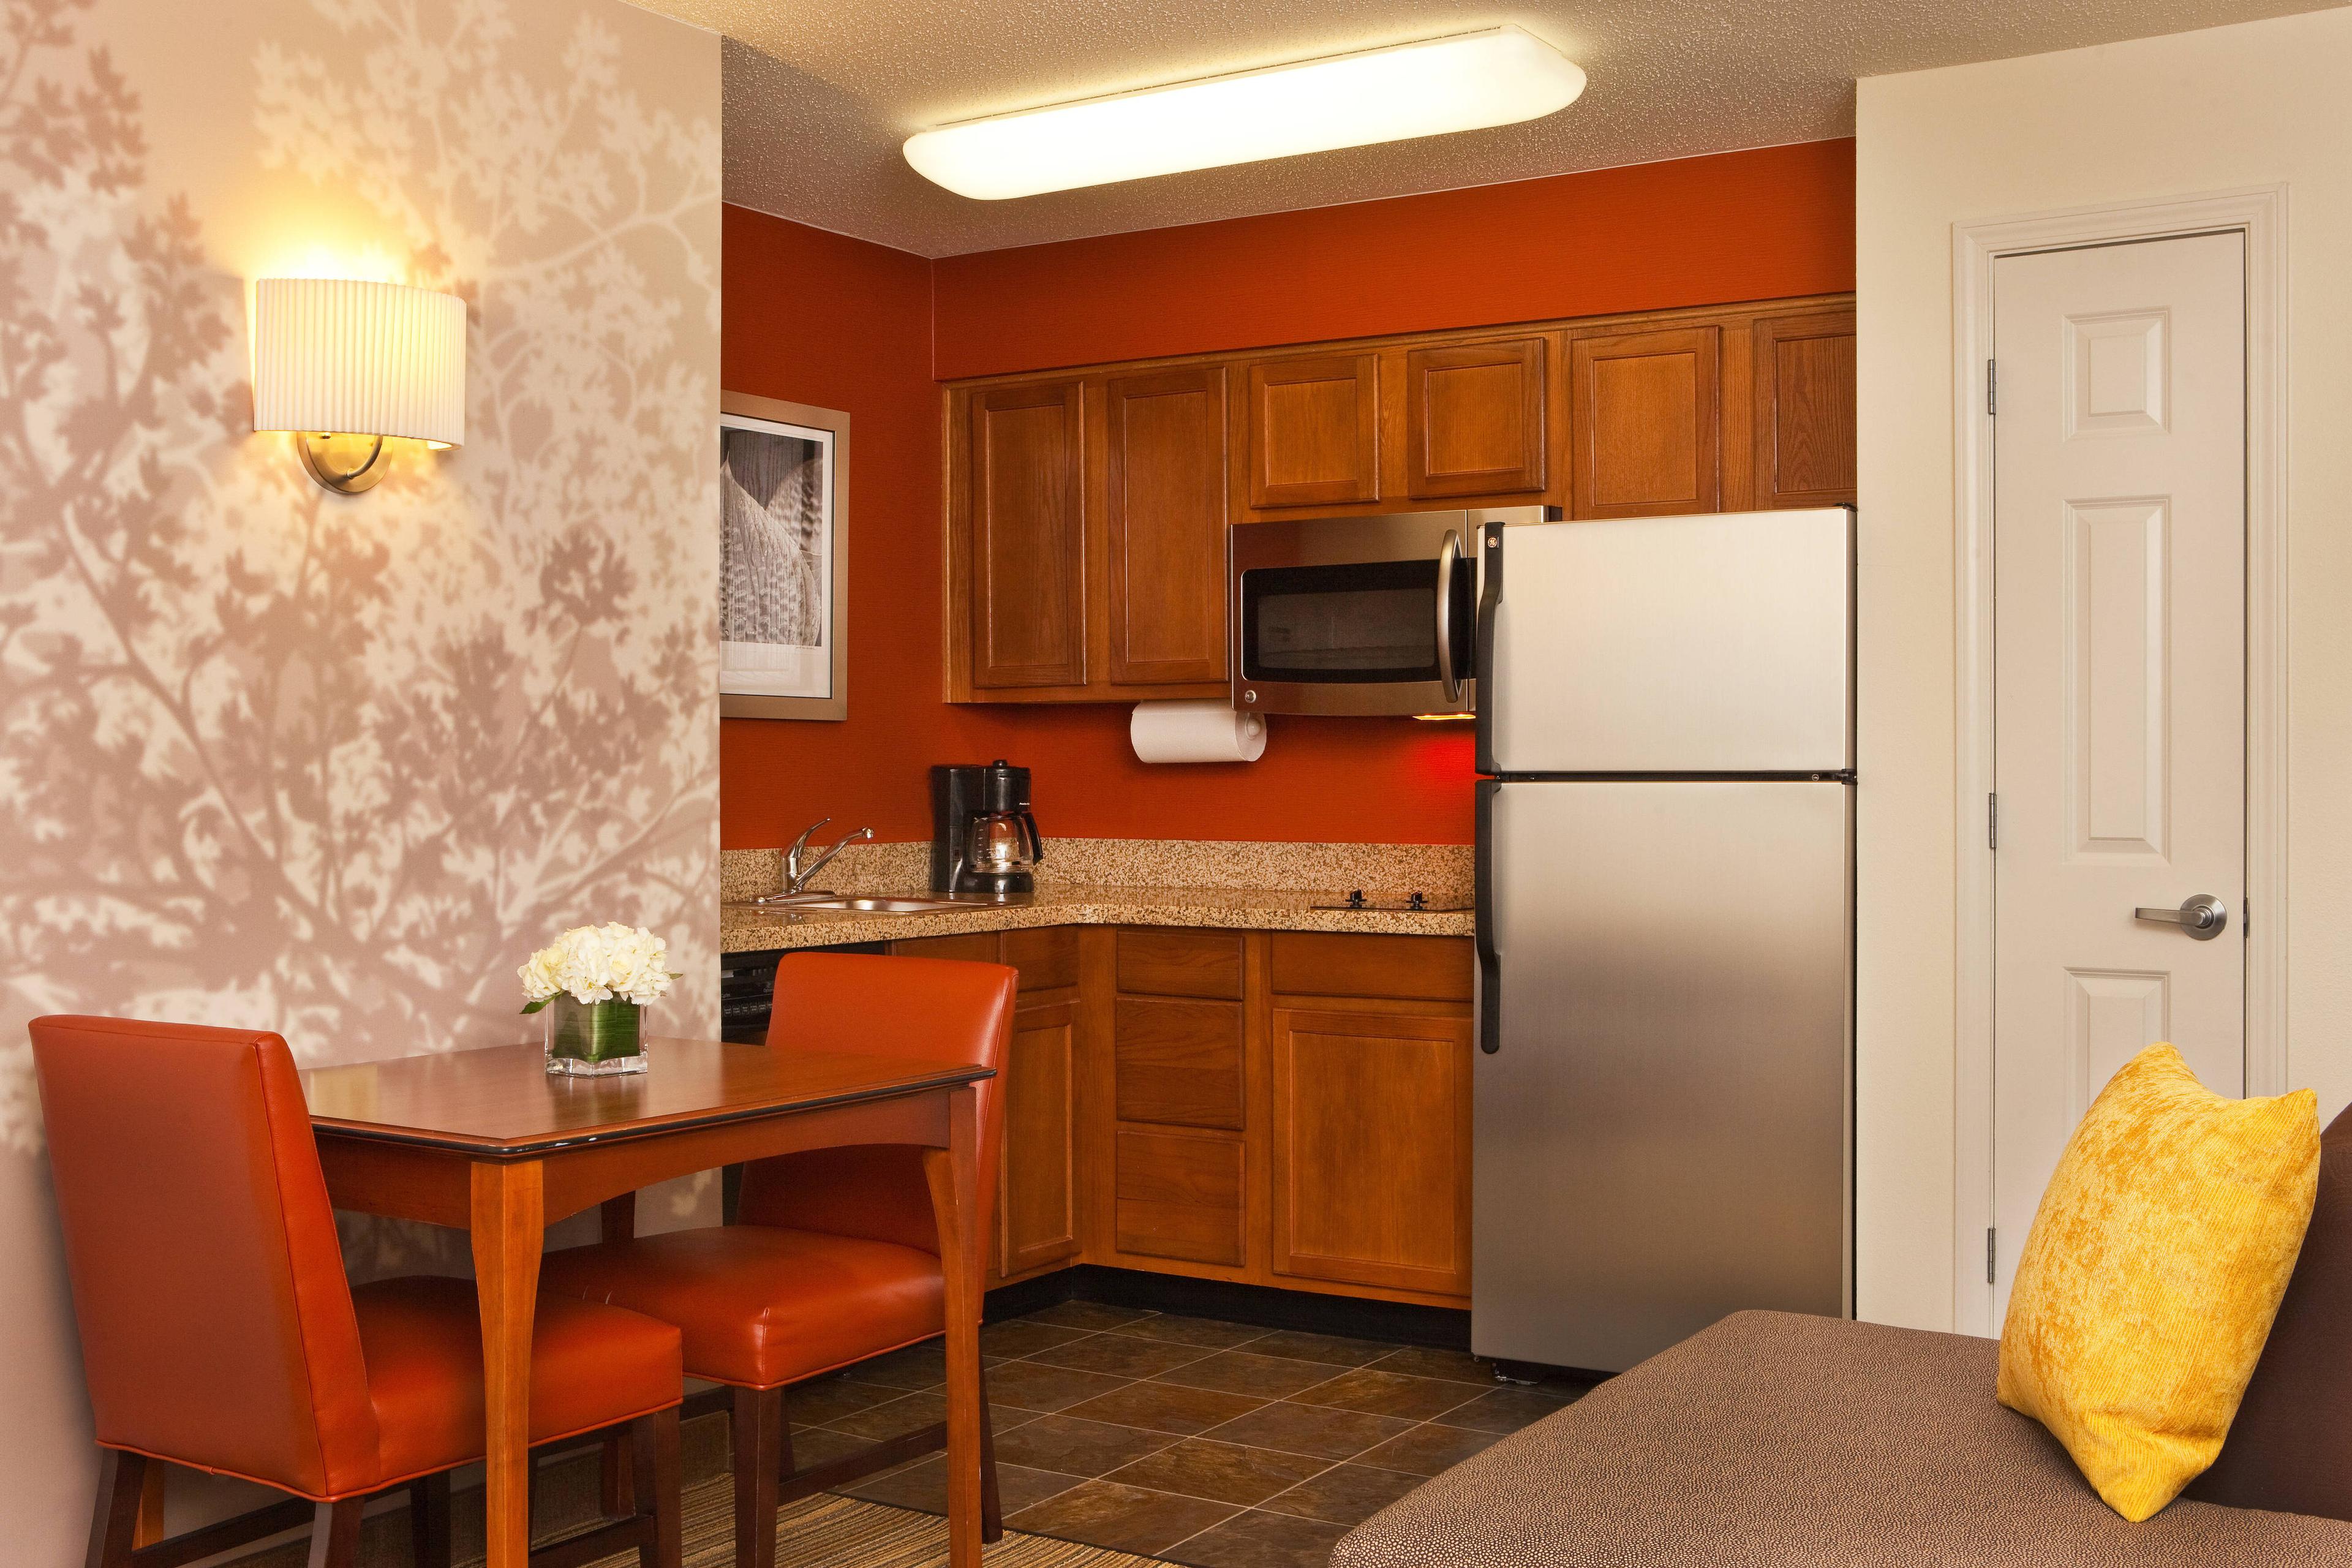 Our Greenbelt hotel's One-Bedroom Suite features a fully equipped kitchen and dining area for two.